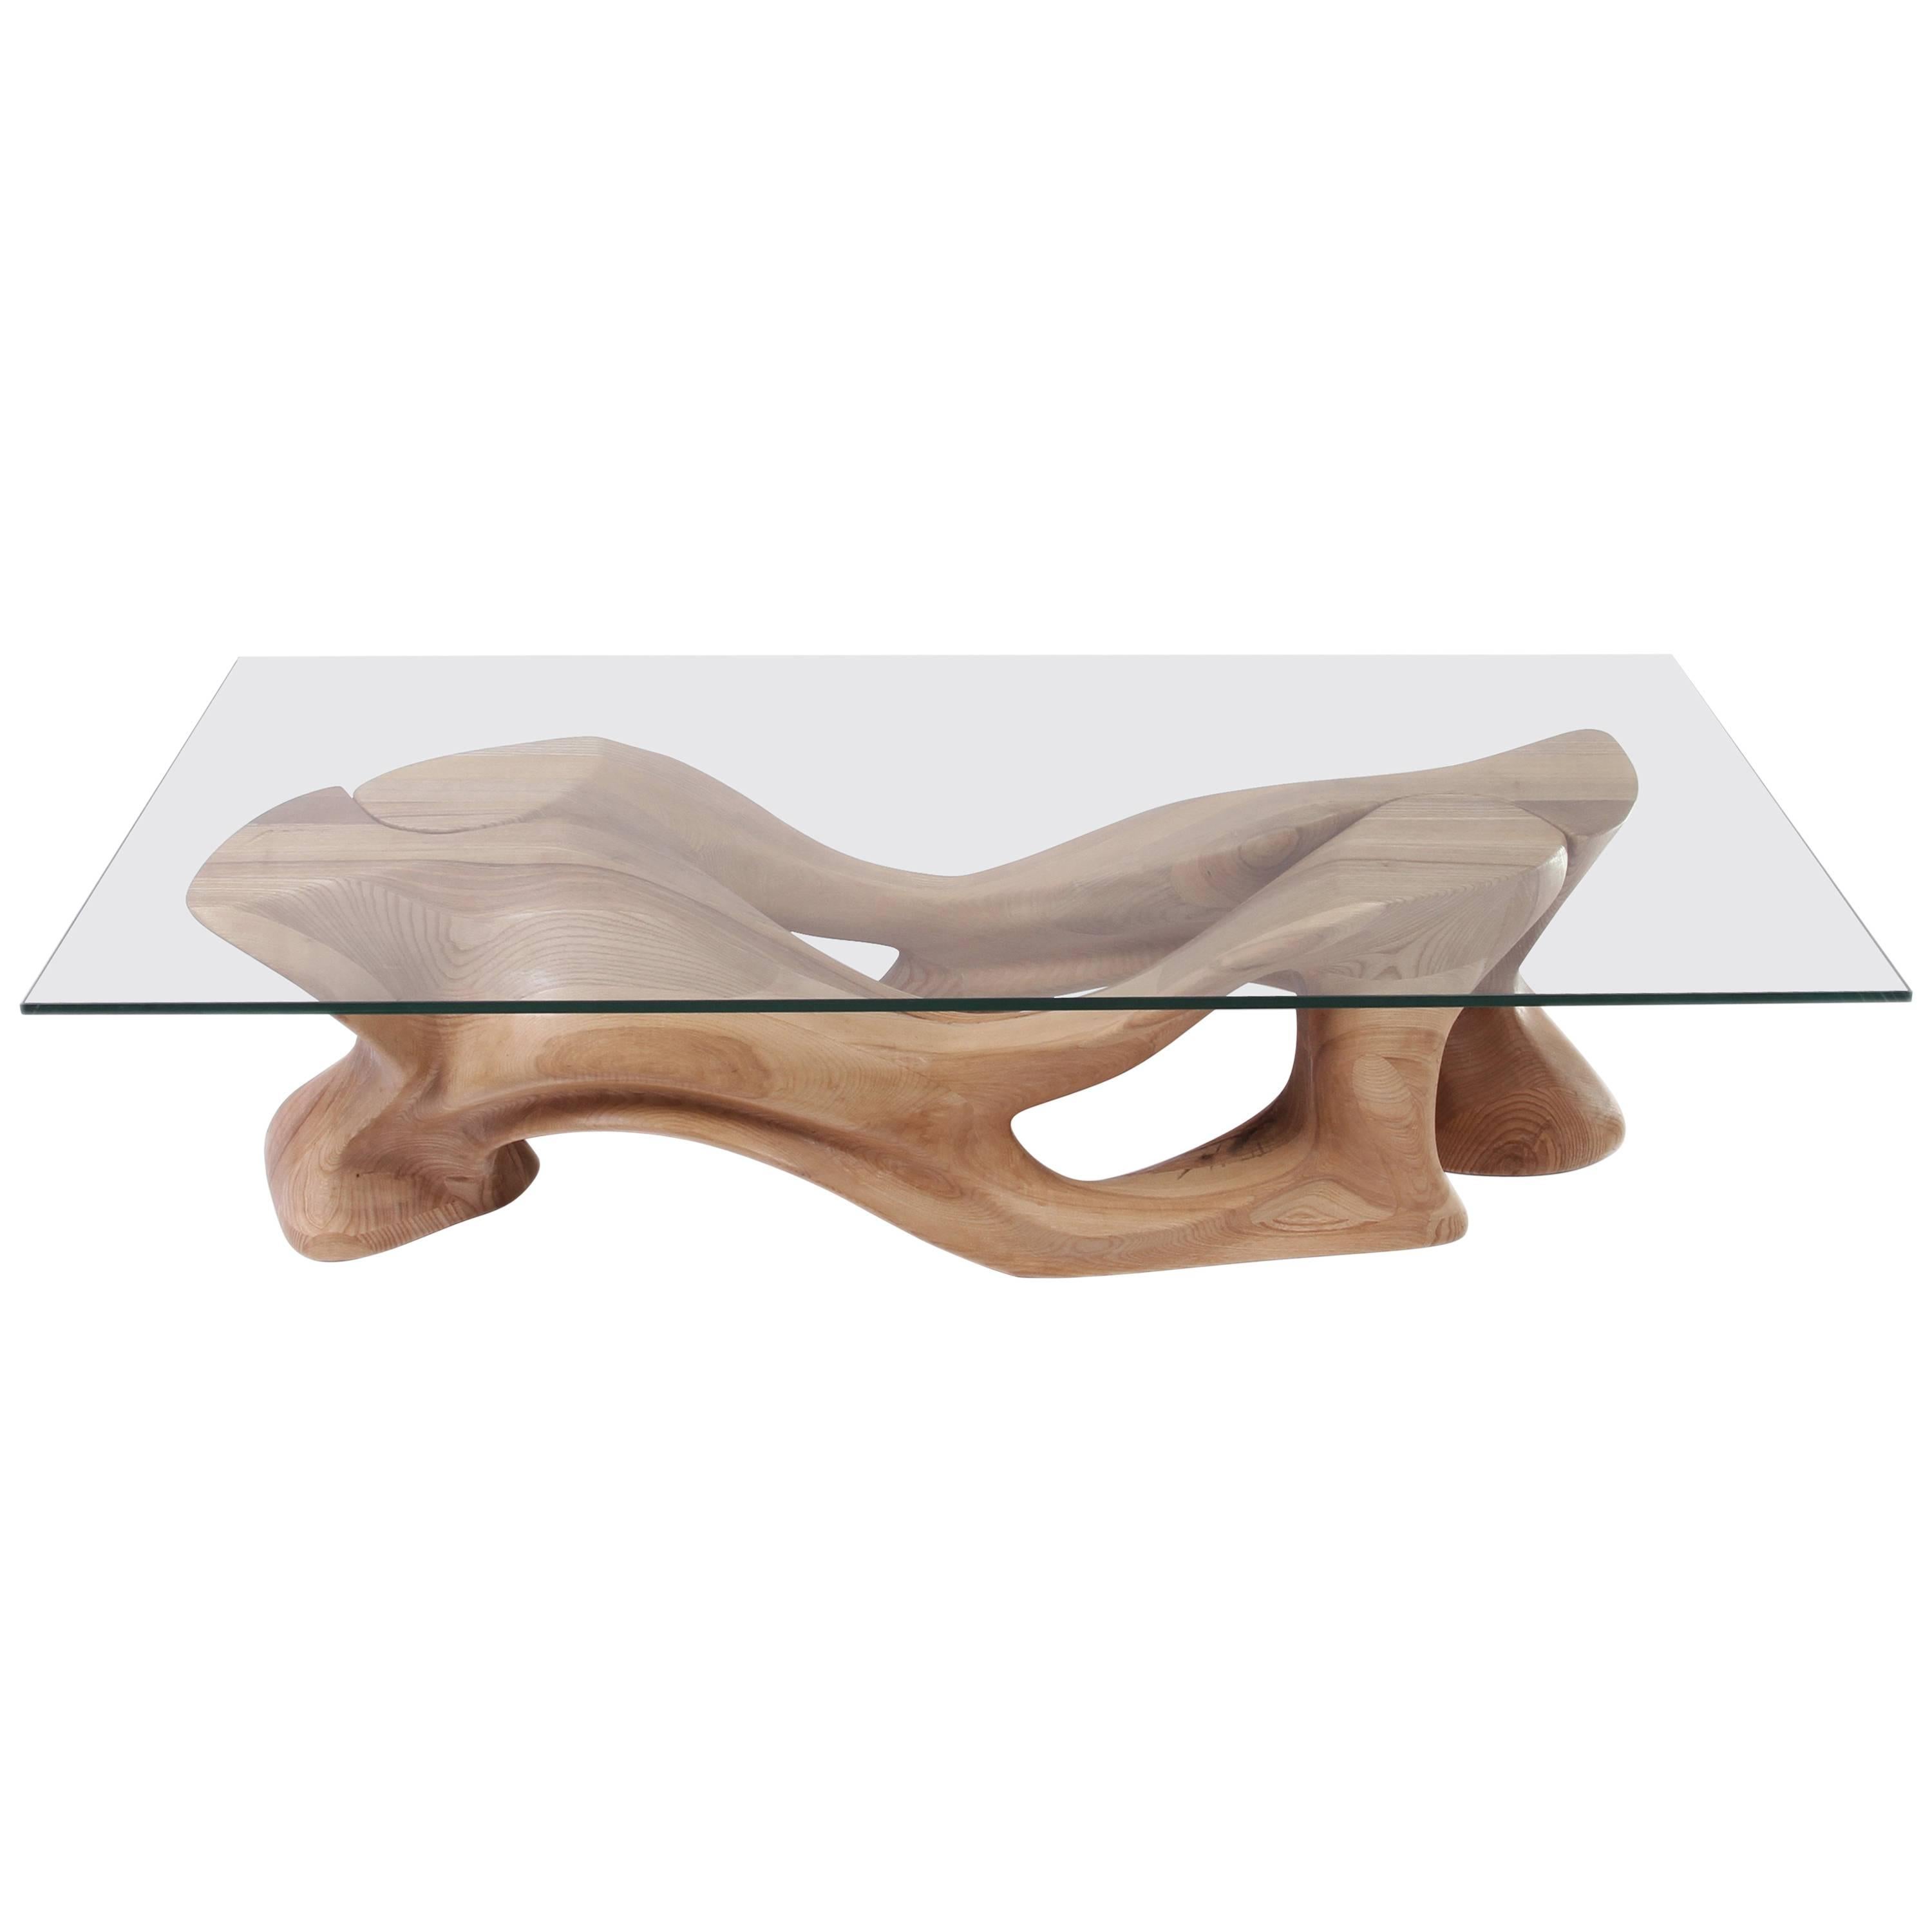 Amorph Modern Crux Coffee Table wit rectangular glass, Ash wood Natural stain For Sale